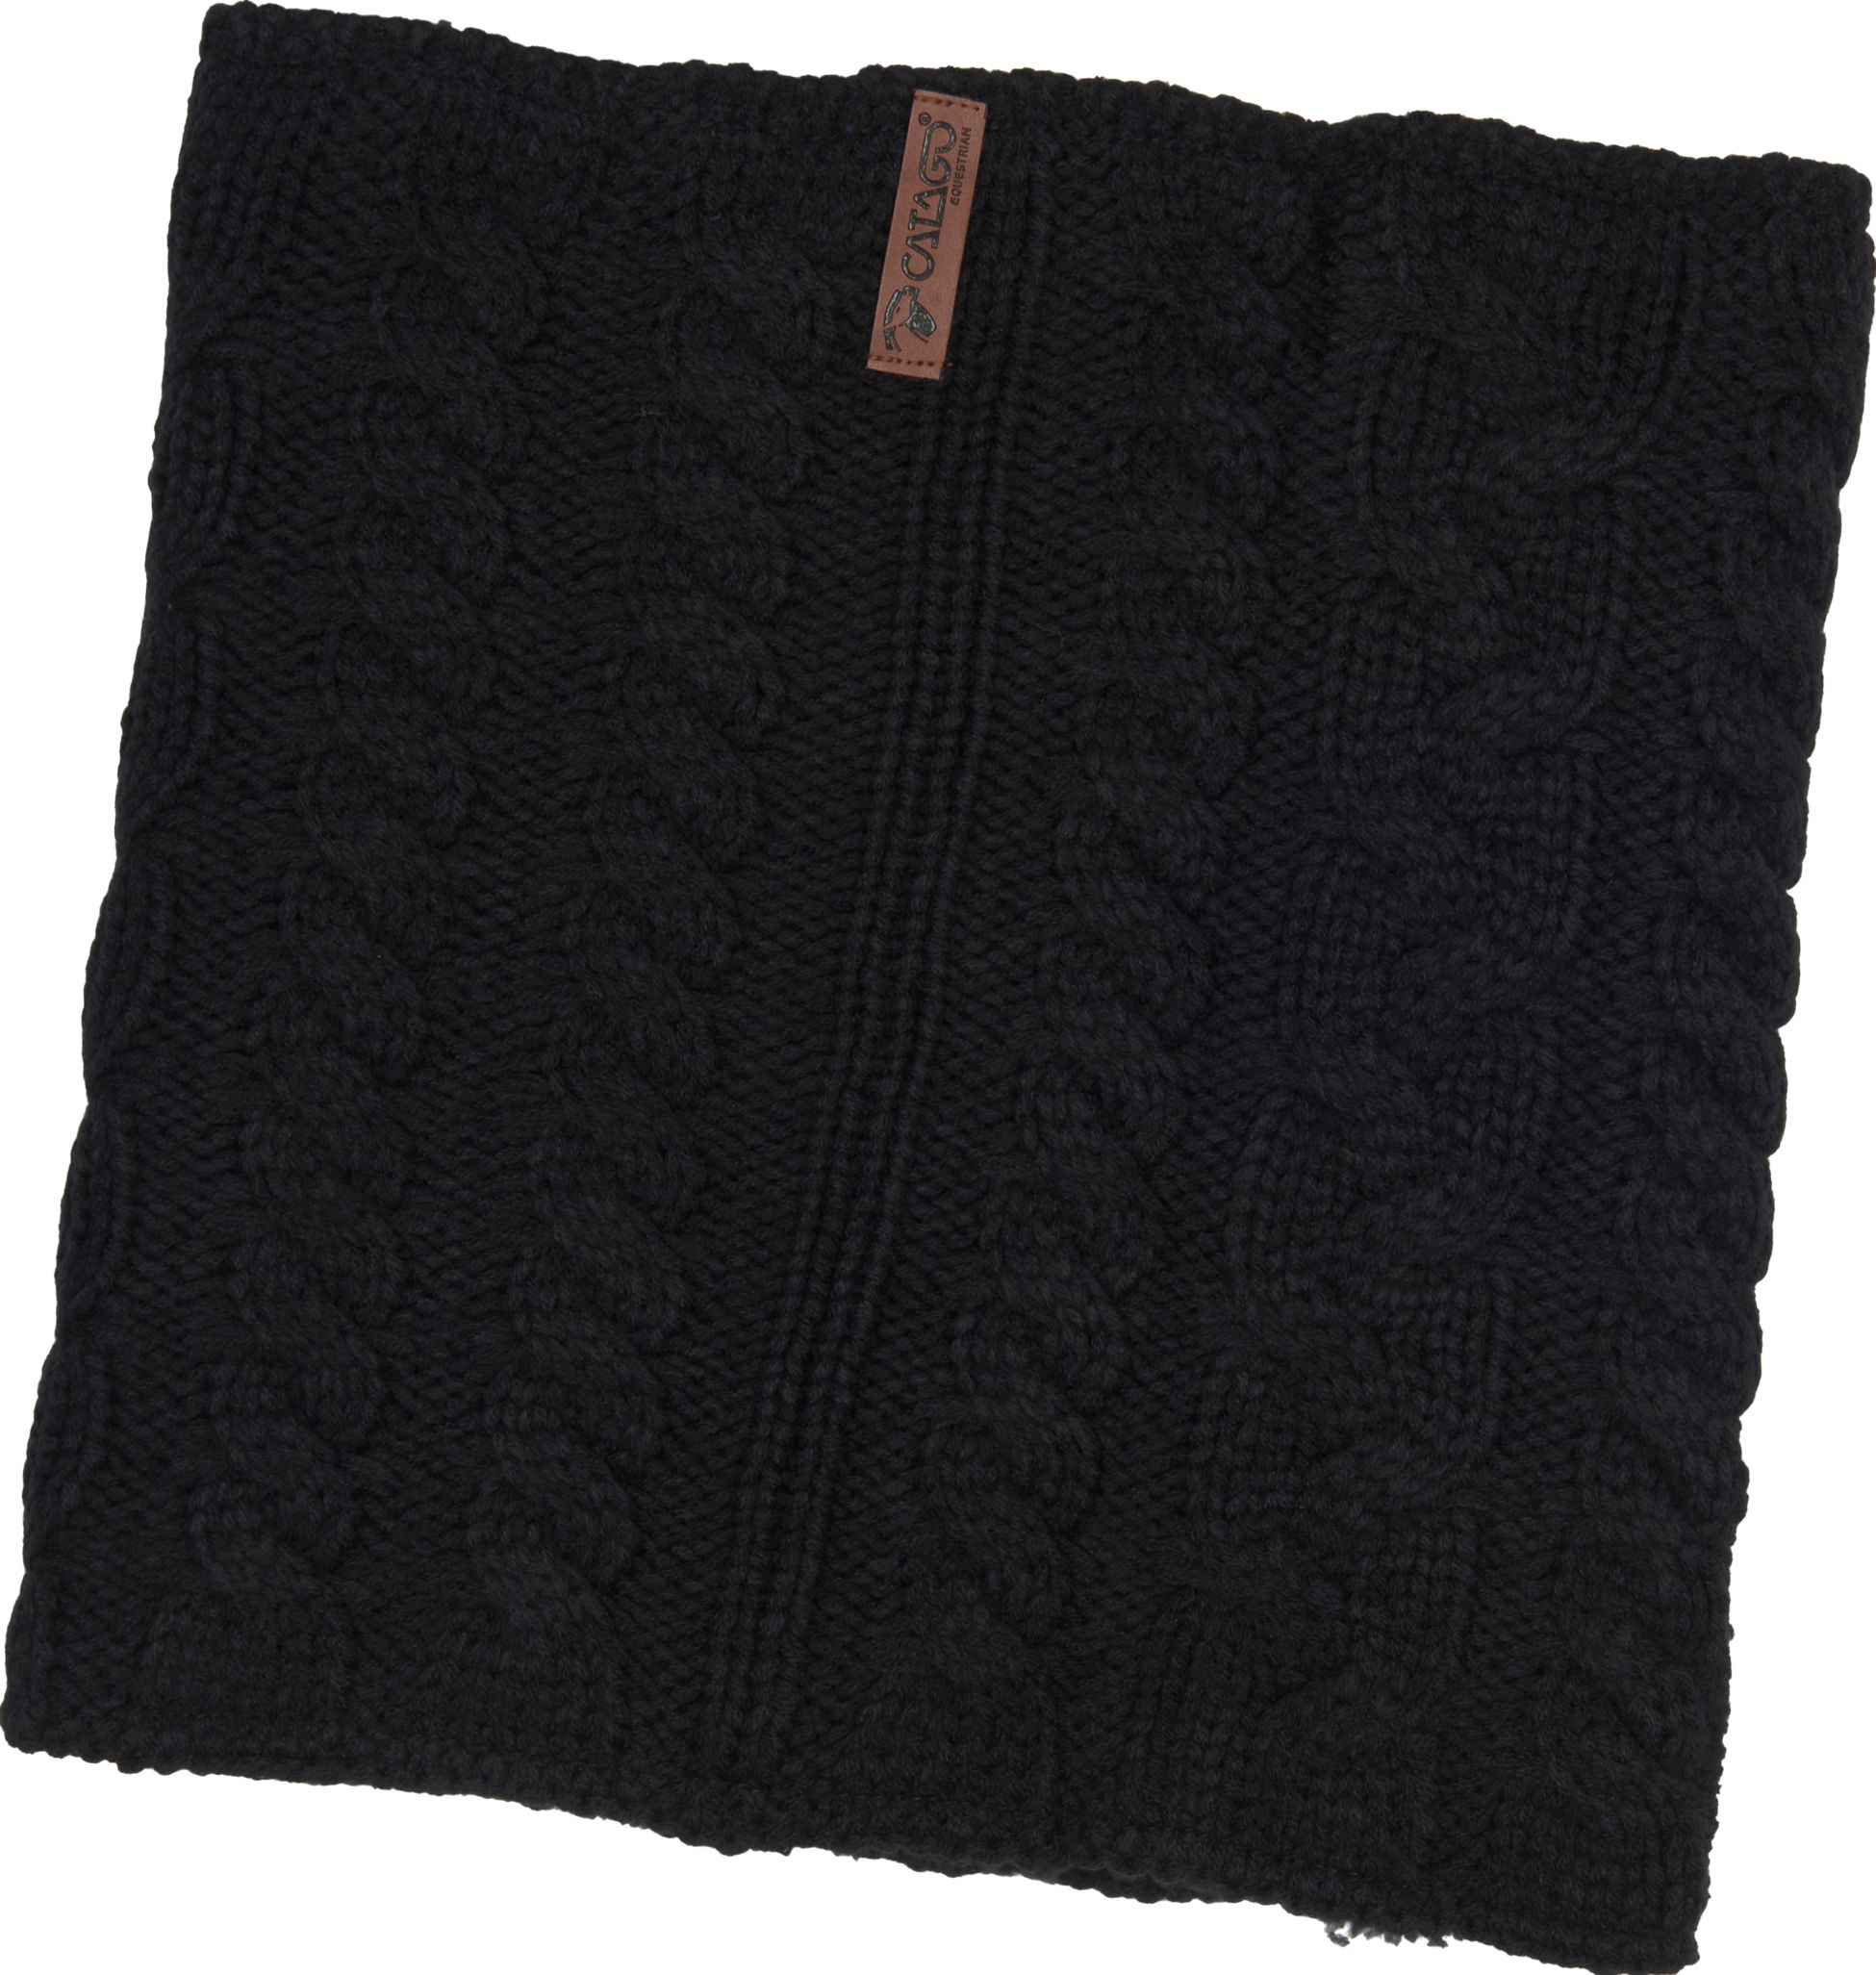 CATAGO, KNITTED LOOP I